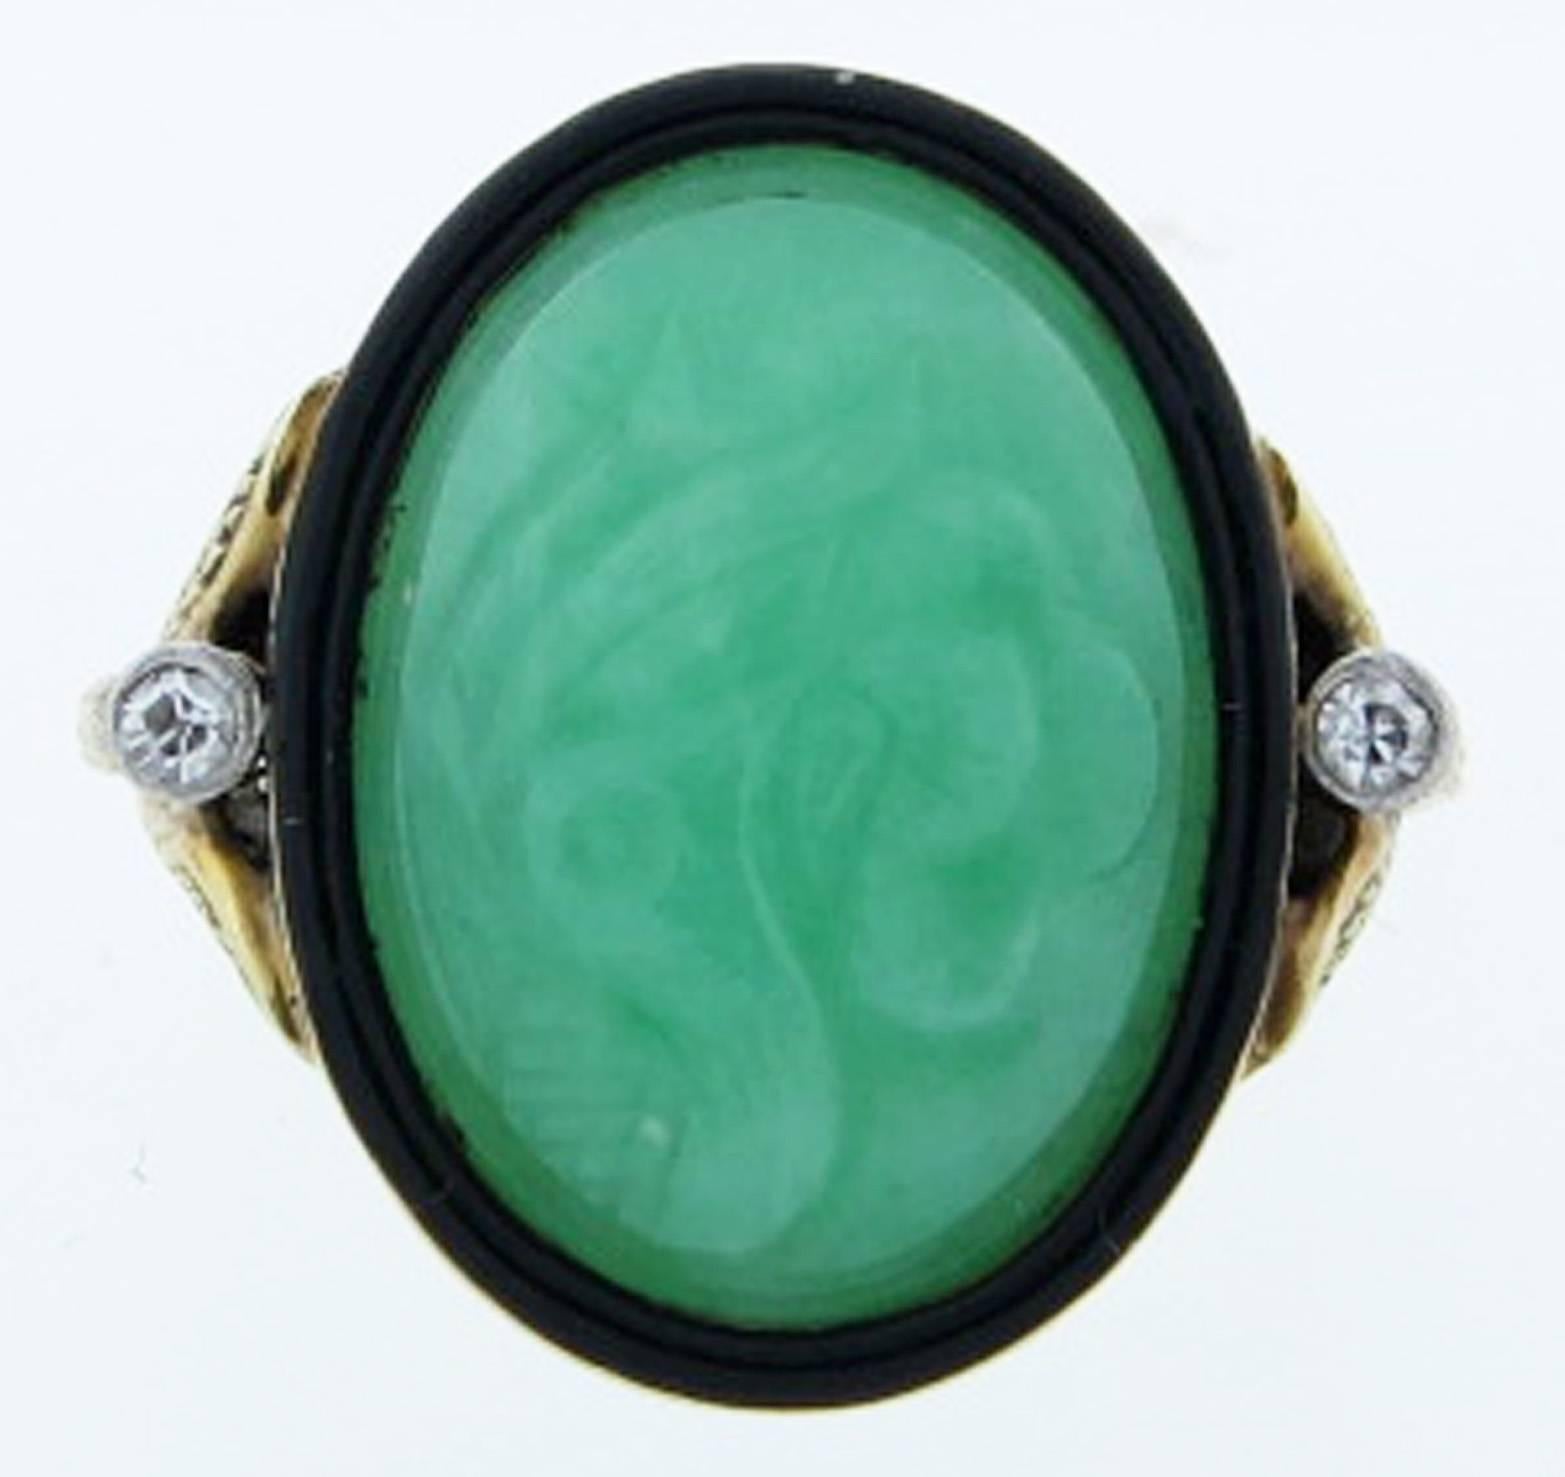 Intricate 14kt. yellow gold mount ring with an oval carved floral design jade center edged in black enamel. Each side is bezel set in white gold with a round old cut diamond. Size 6 1/2 and can be sized circa 1920.